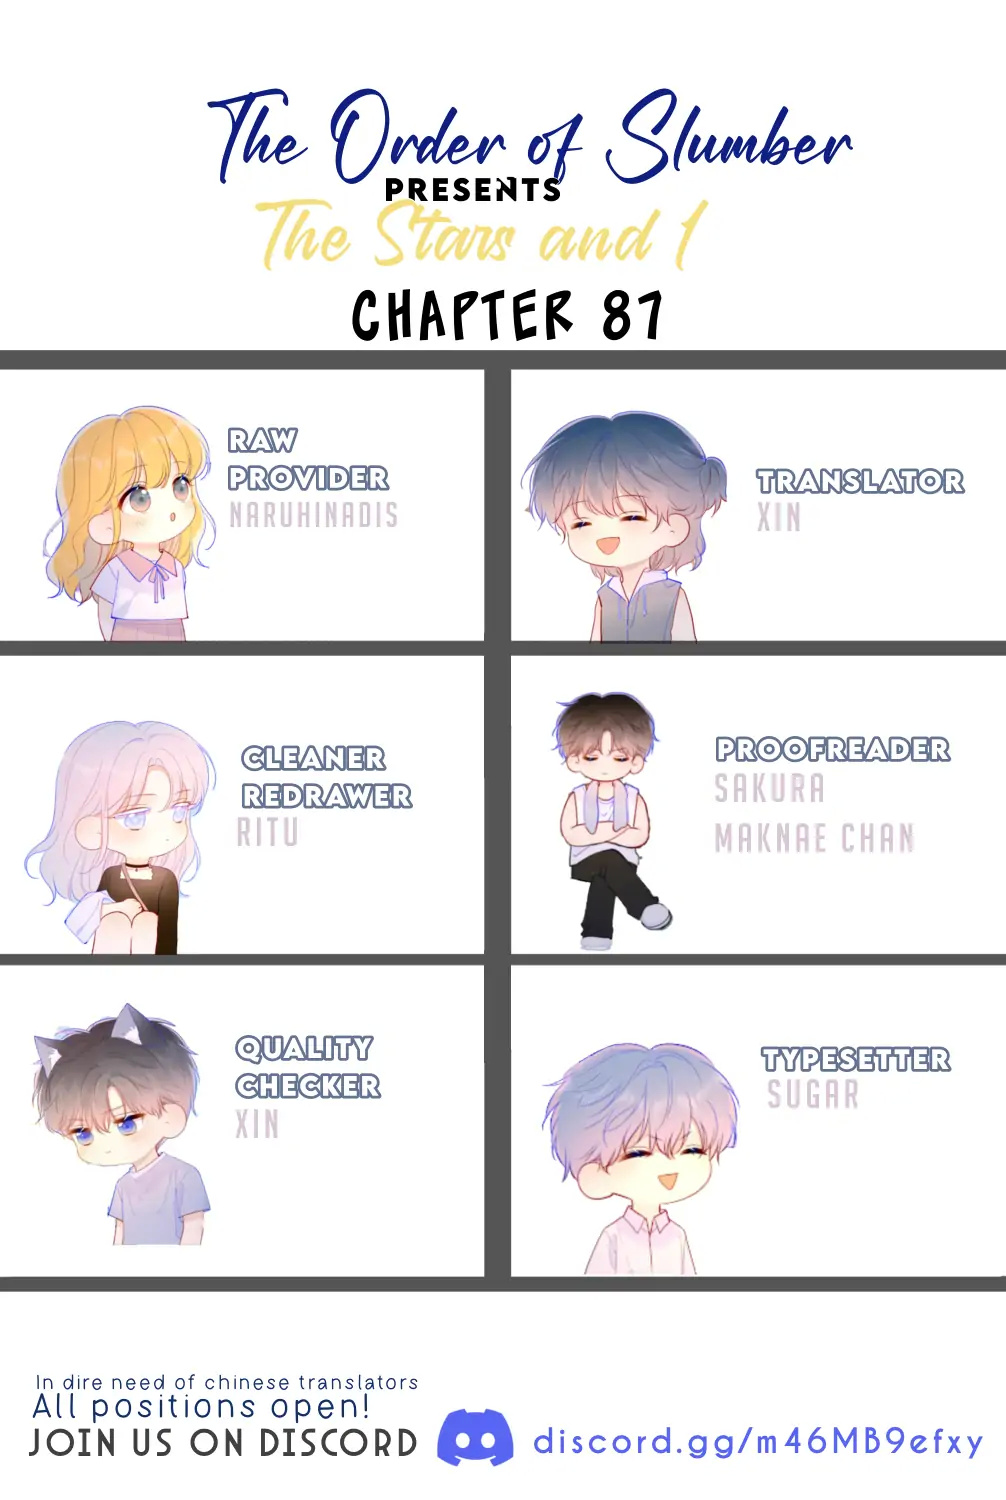 The Stars and I Chapter 87